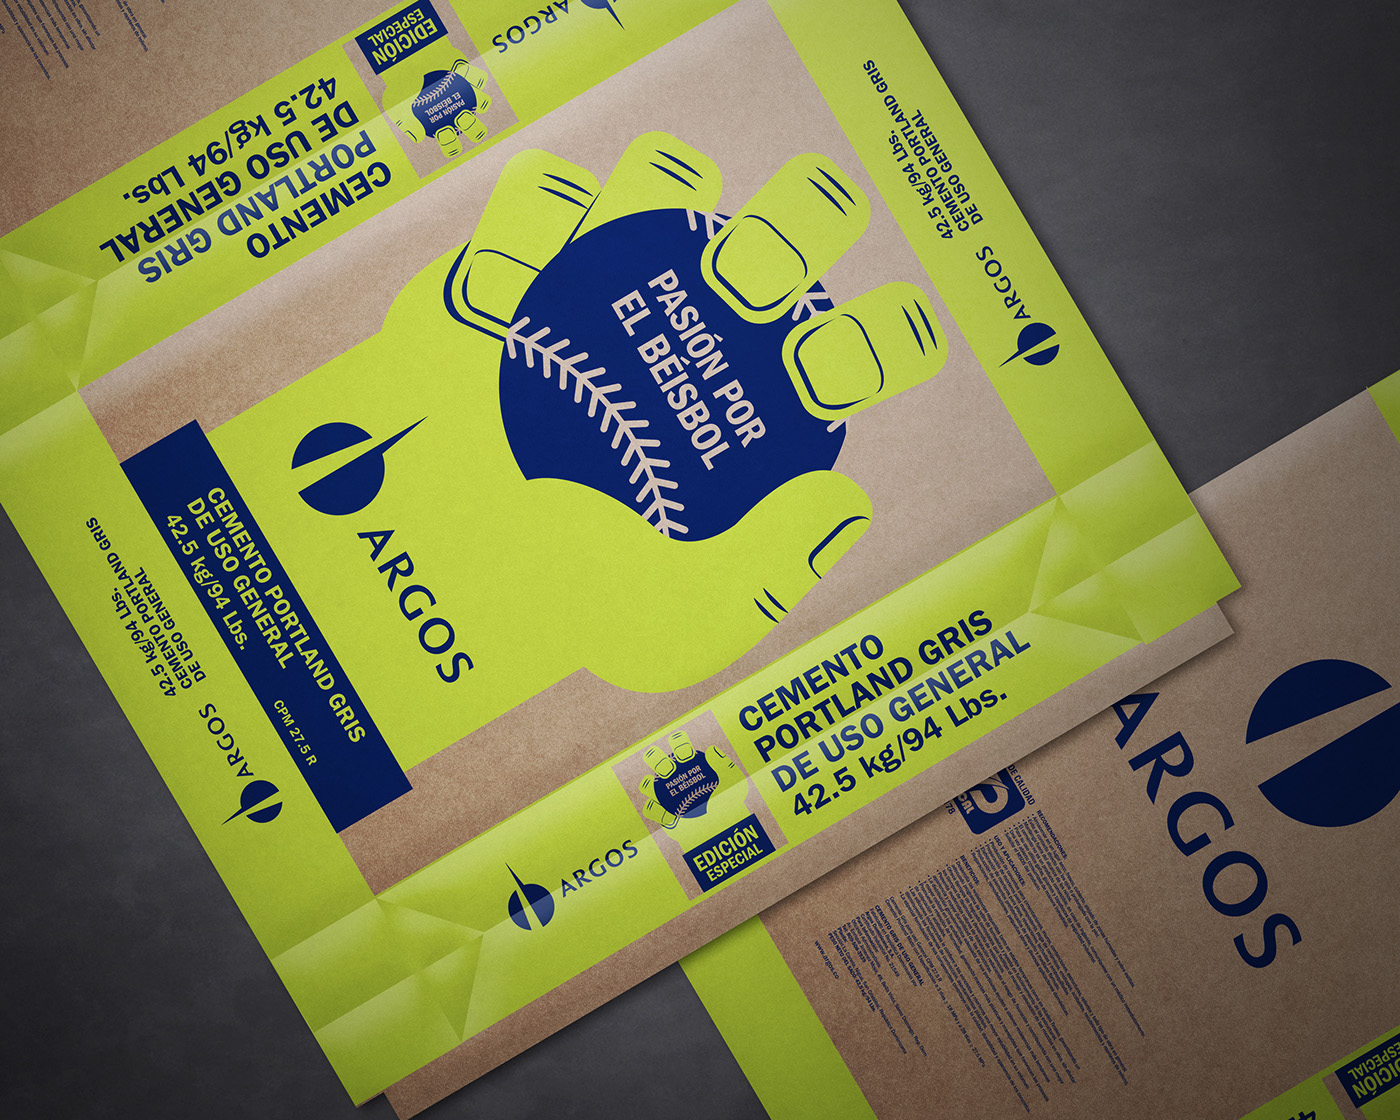 cement concrete beisbol baseball Cannes Lions fiap lia Packaging embalaje